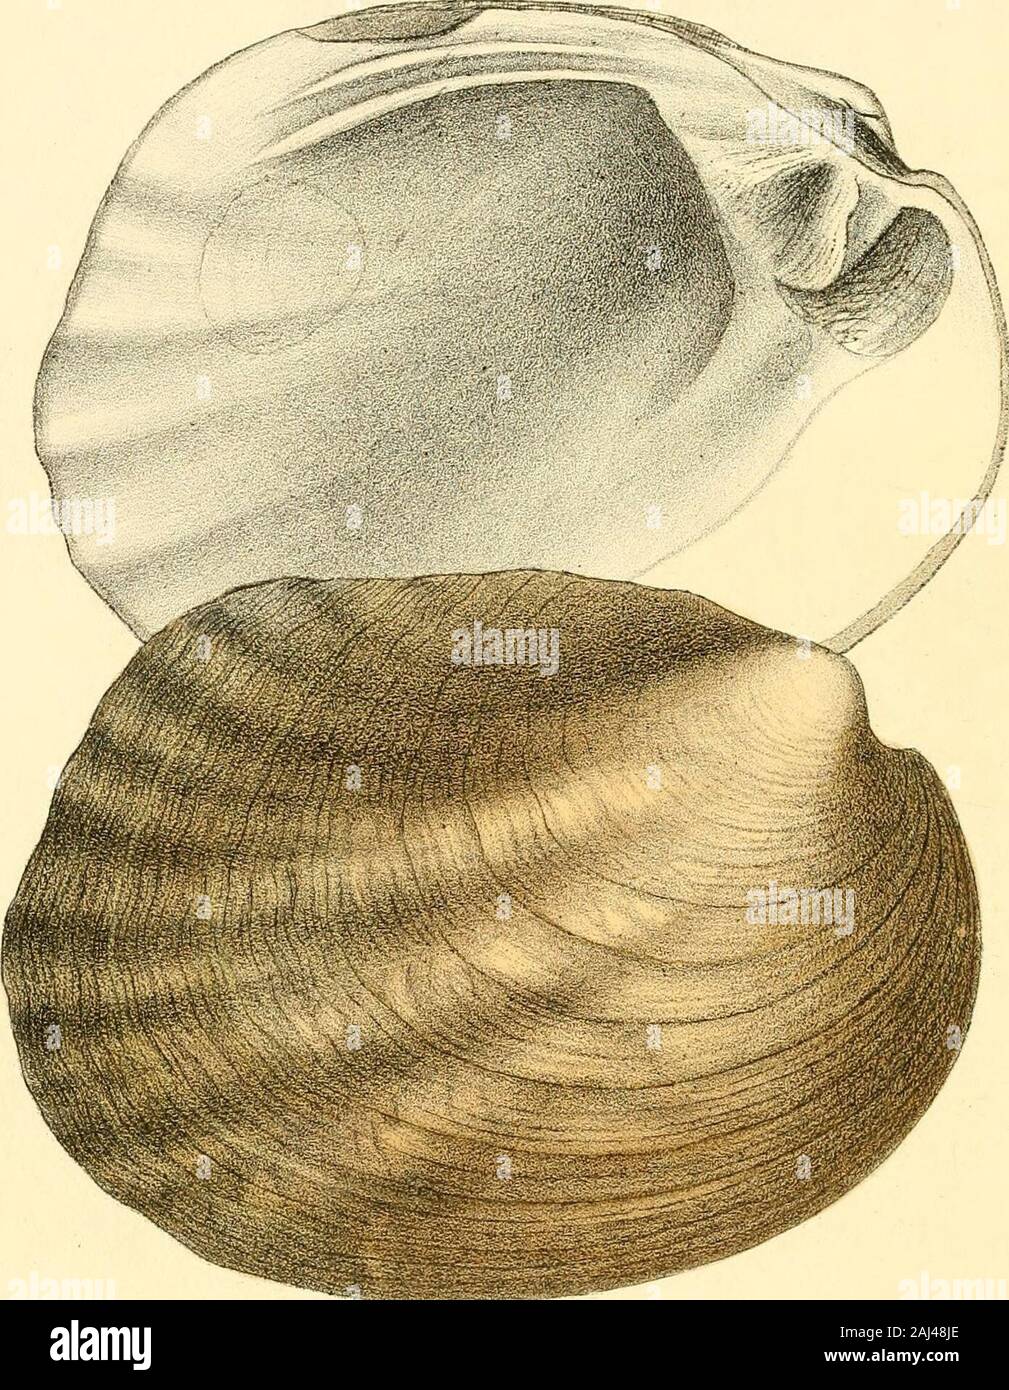 Monography of the family Unionidæ : or, Naiades of Lamarck (fresh water bivalve shells) of North America ... . ? rtoni,, 6on. SL.Vnio fmqosus, Con.rad. CONTENTS Plate I. Unio ovatus.„ II. ,, fasciatus. III. S clava.(decisus. jy 5 reflexus.  flexuosus. Y (phillipsii. I nietaneovus. Note.—Several species were noticed in the prospectus, which wehave omitted in this number, in order to figure others supposed to benew. JVo. 3. MONOGRAPHY FAMILY UNIONIDiE, OR NAIADES OF LAMARCK, (FRESH WATER BIVALVE SHELLS,) NORTH AMERICA, ILLUSTRATED BY FIGURES DRAWN ON STONE FROM NATURE. BY T. A. CONRAD, CURATOR Stock Photo